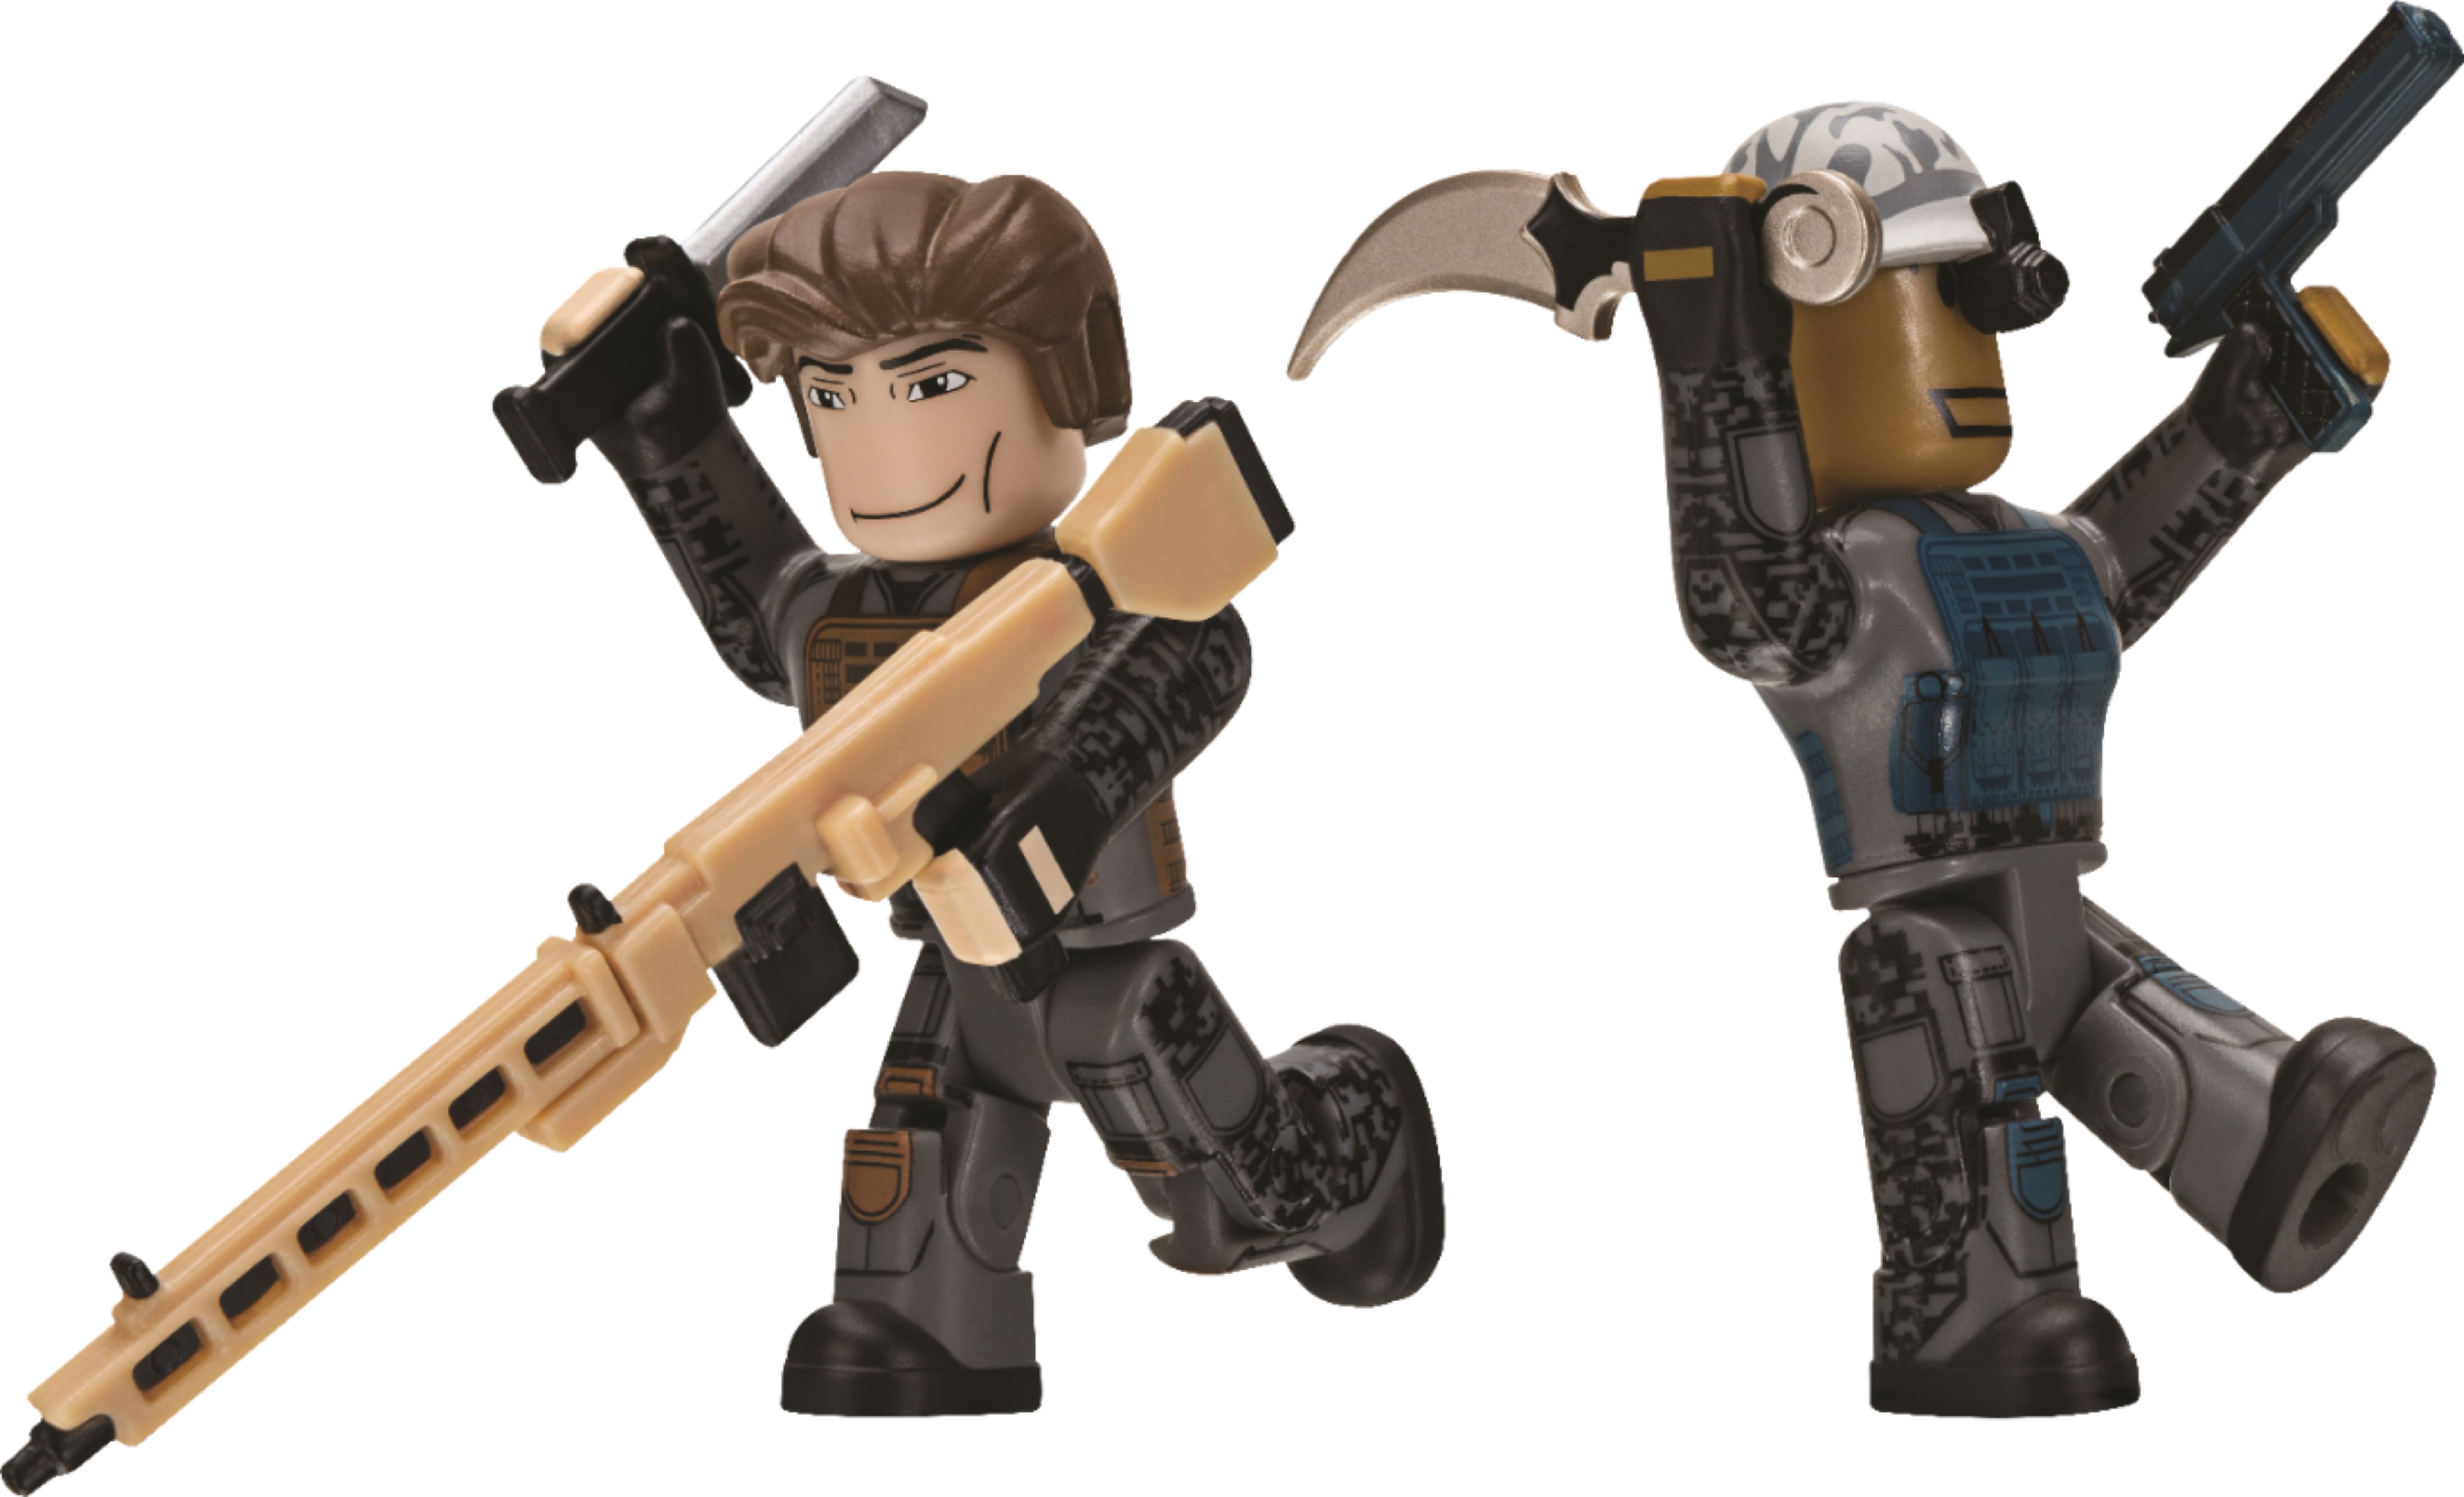 Roblox Game Pack Styles May Vary Rob0313 Best Buy - jazwares roblox desktop series action figure styles may vary rob0253 best buy